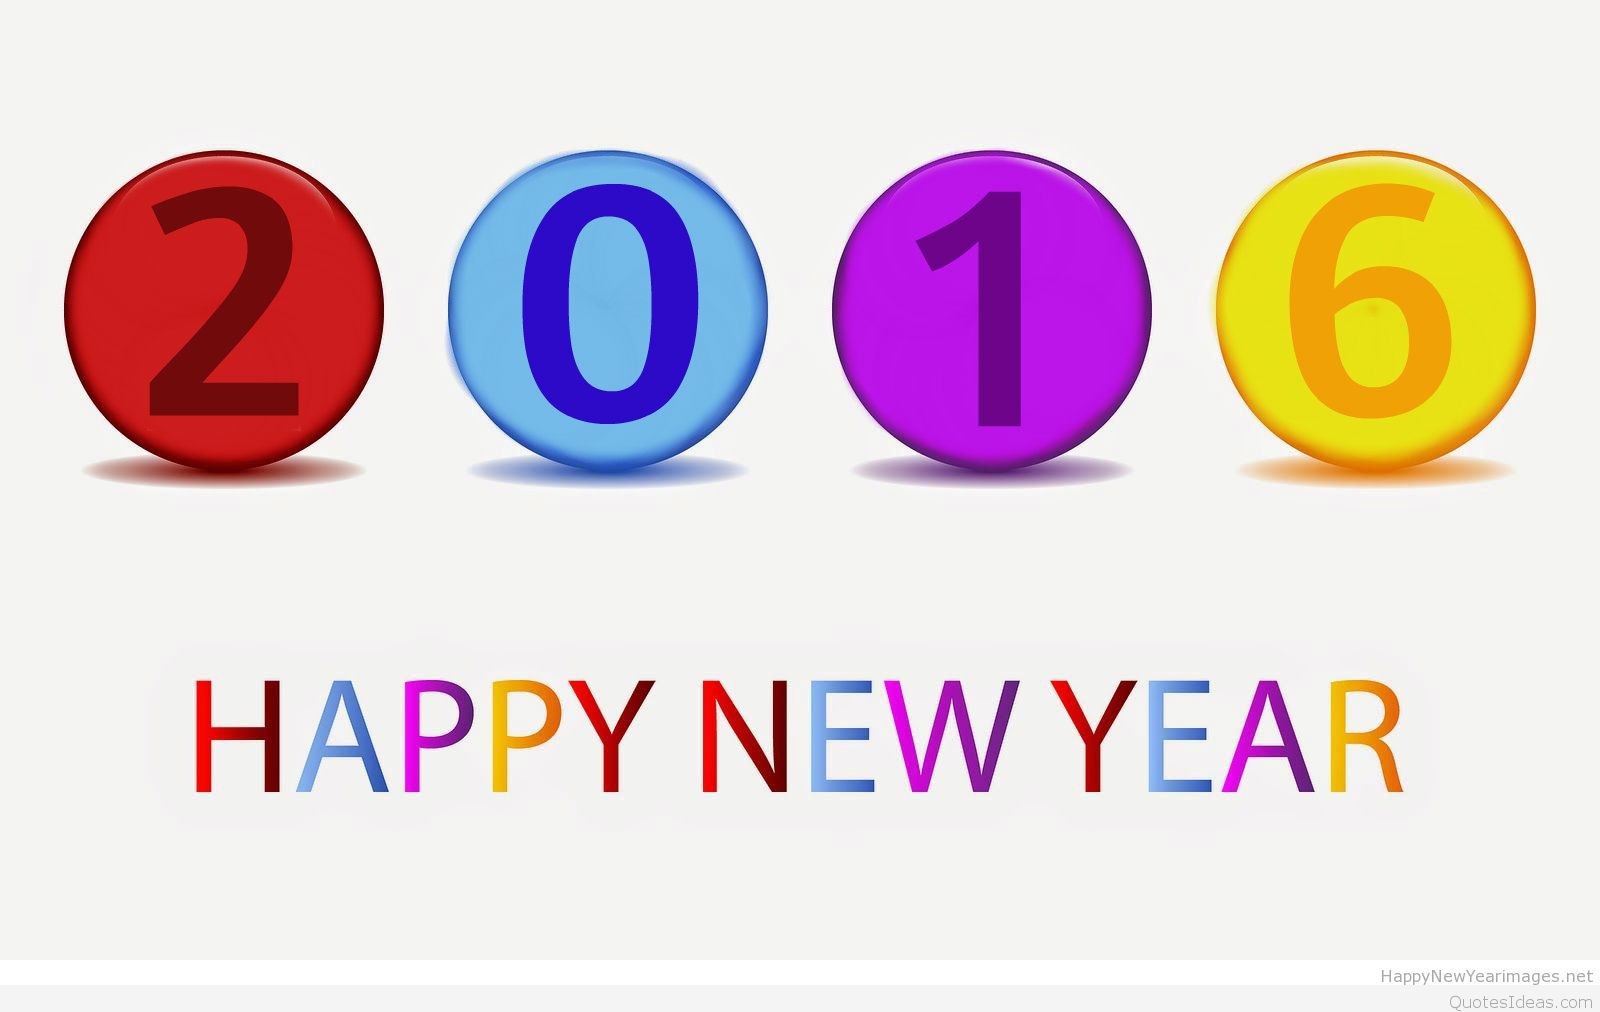 Happy new year clipart free d